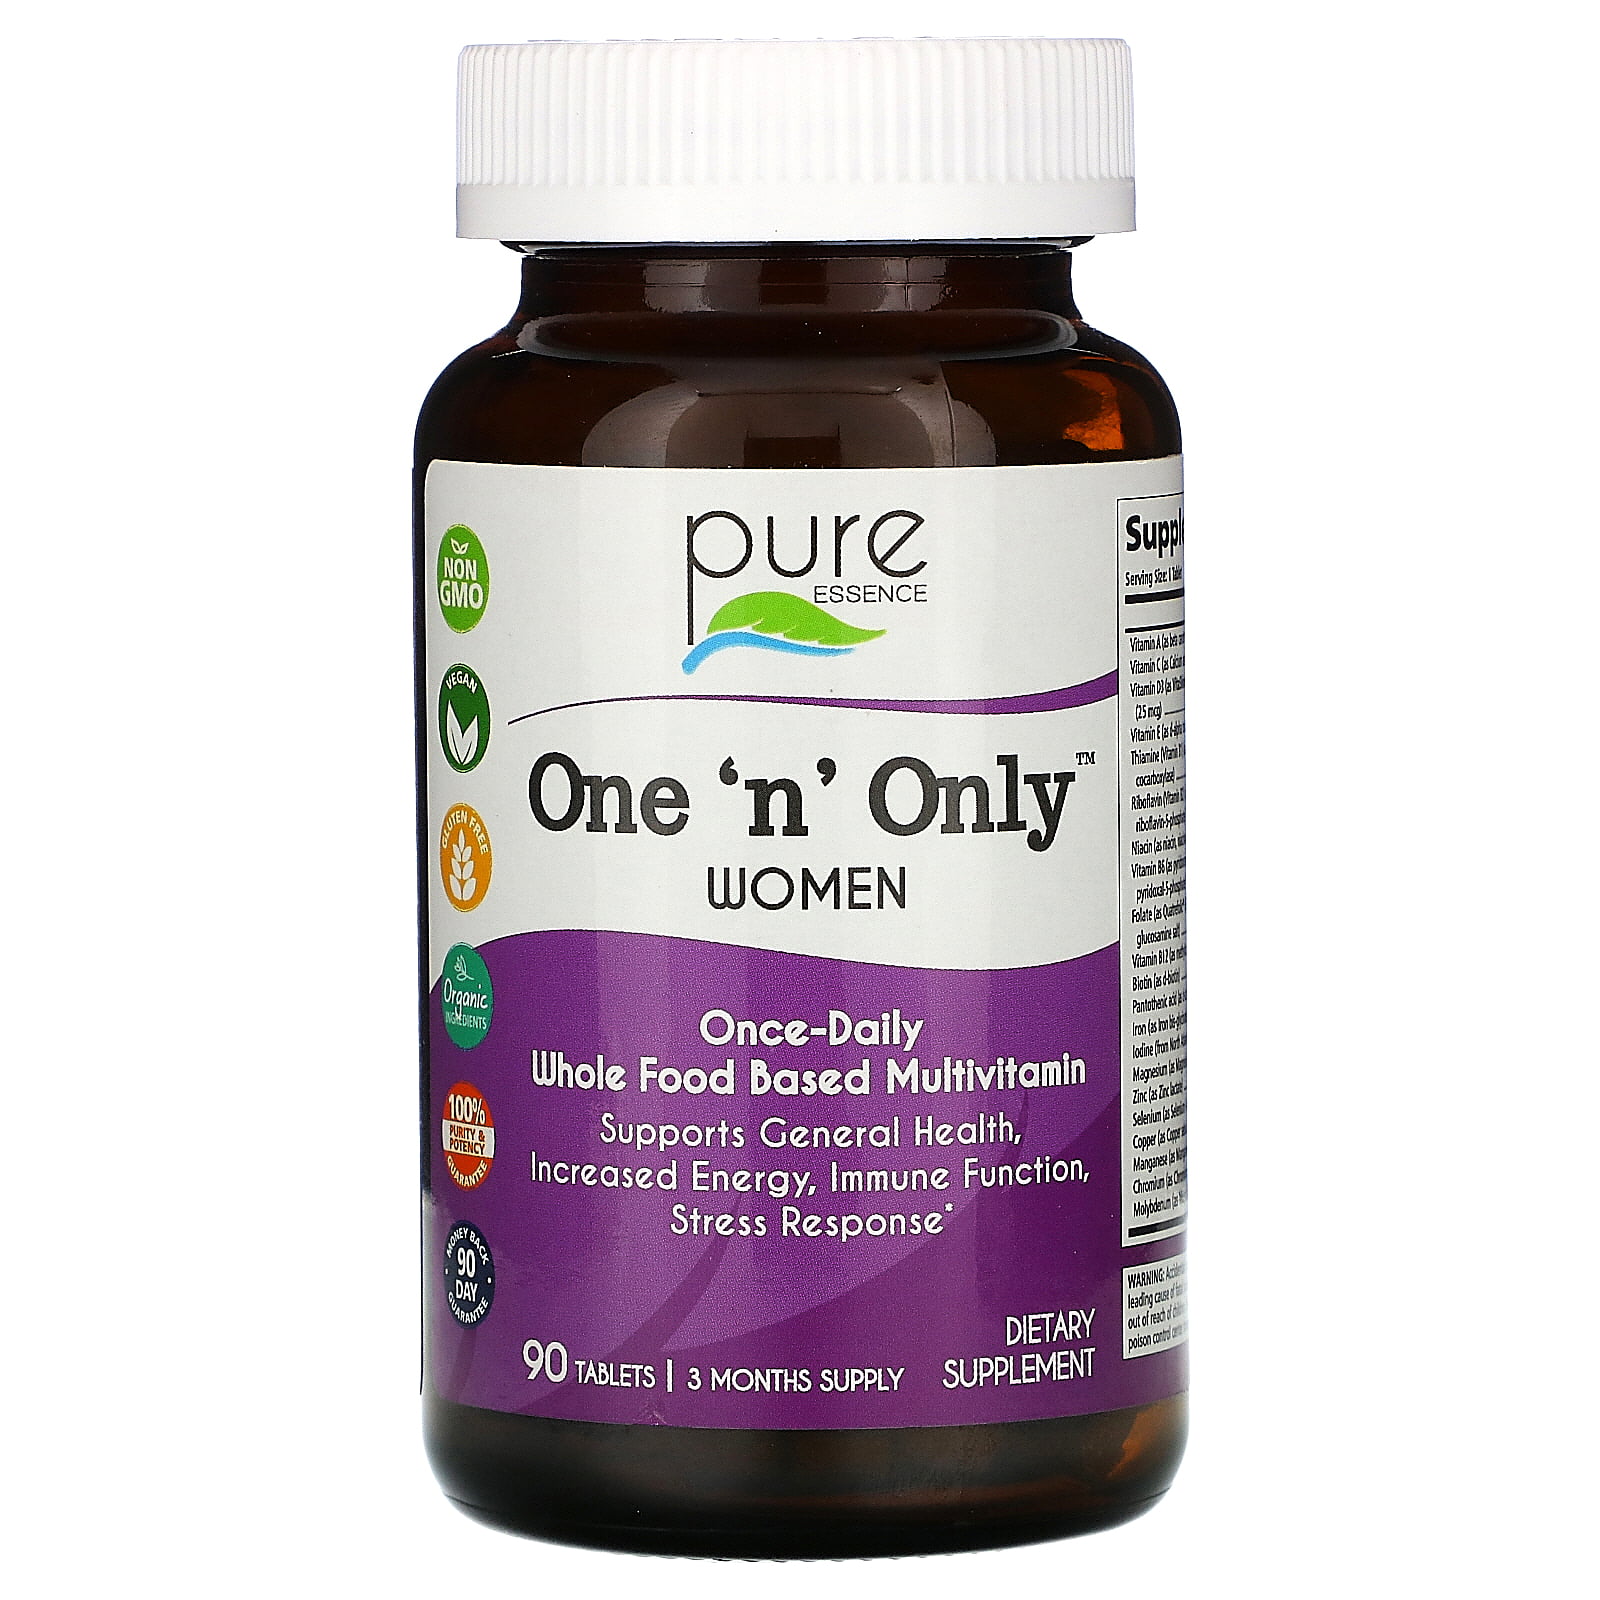 One N Only Multivitamin for Women - One a Day Whole Food Supplement with Superfoods, Minerals, Enzymes, Vitamin D, D3, B12, Biotin by Pure Essence - 90 Tablets